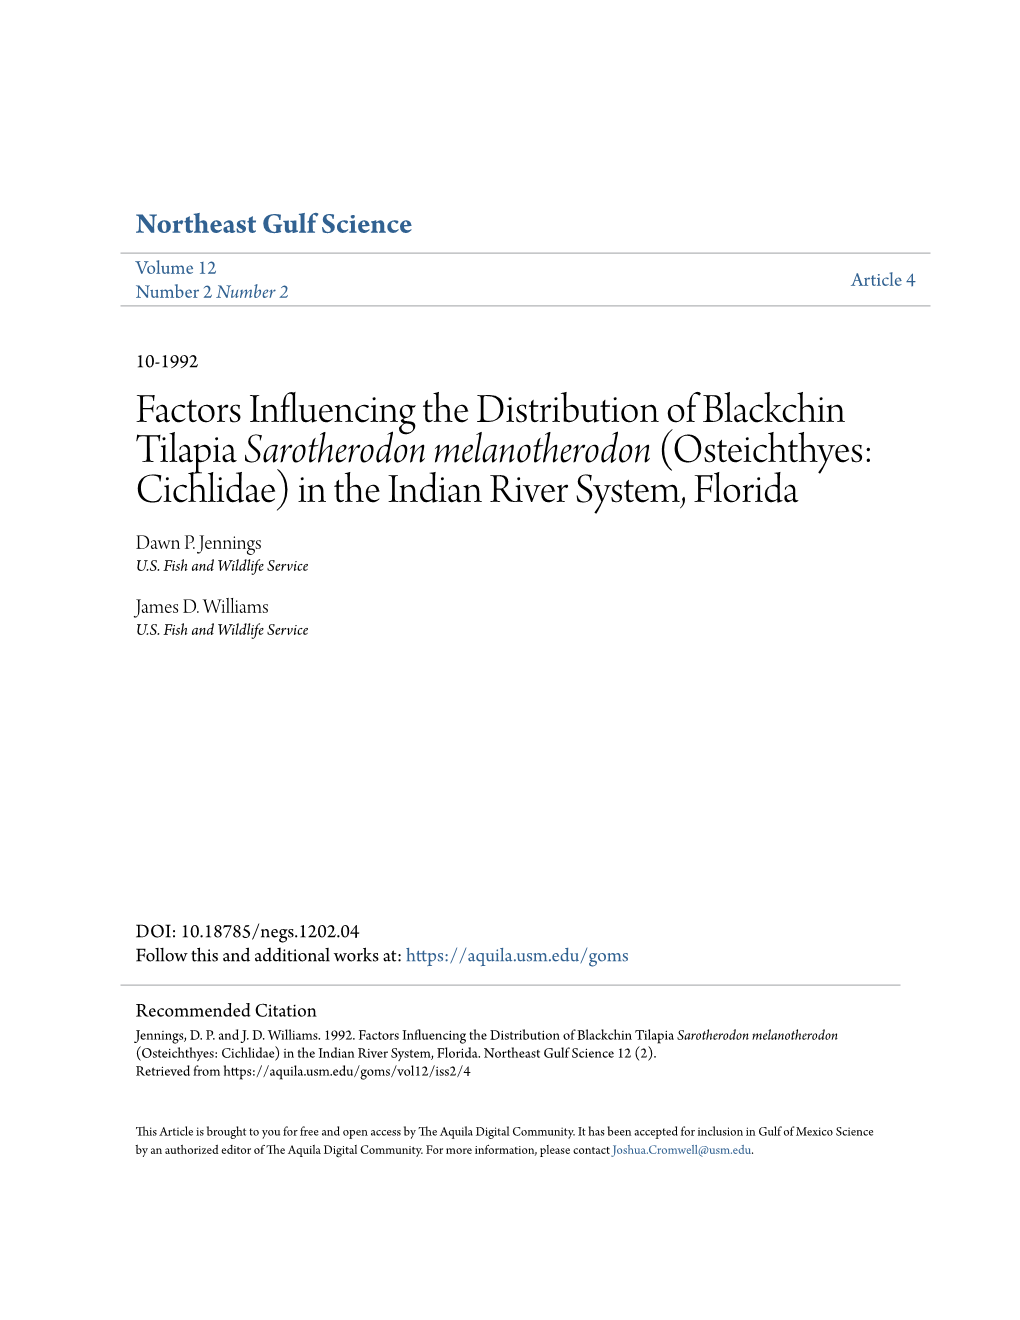 Factors Influencing the Distribution of Blackchin Tilapia Sarotherodon Melanotherodon (Osteichthyes: Cichlidae) in the Indian River System, Florida Dawn P